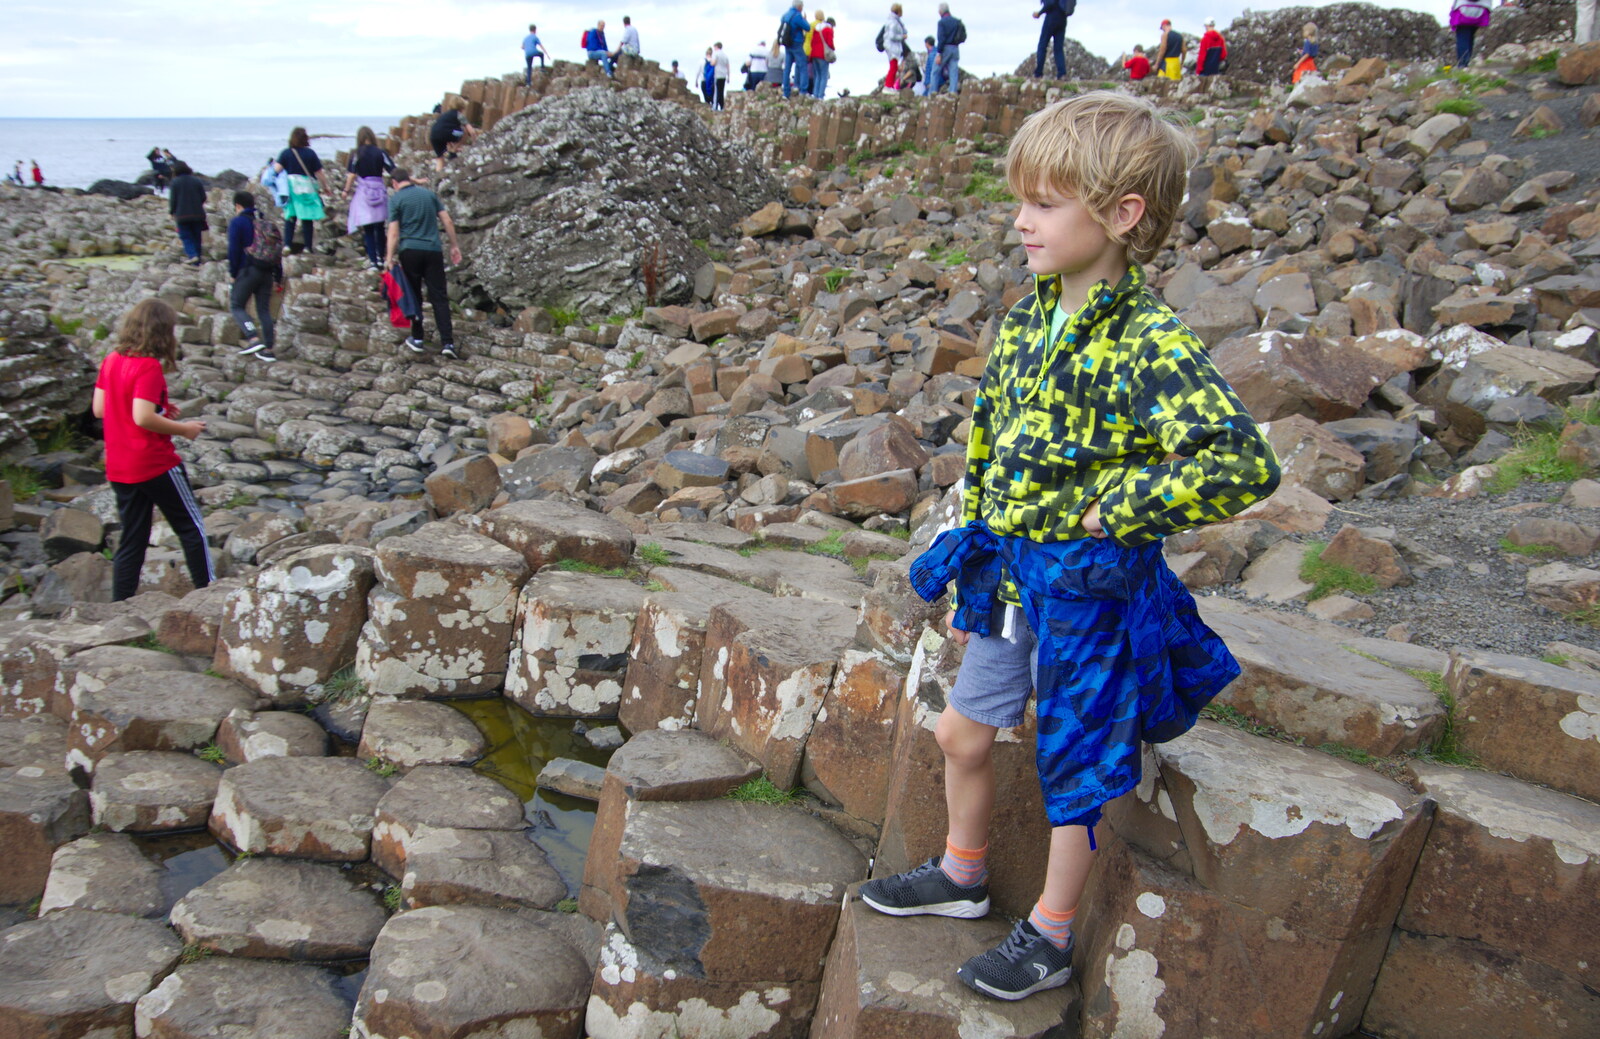 Harry surveys the scene from The Giant's Causeway, Bushmills, County Antrim, Northern Ireland - 14th August 2019